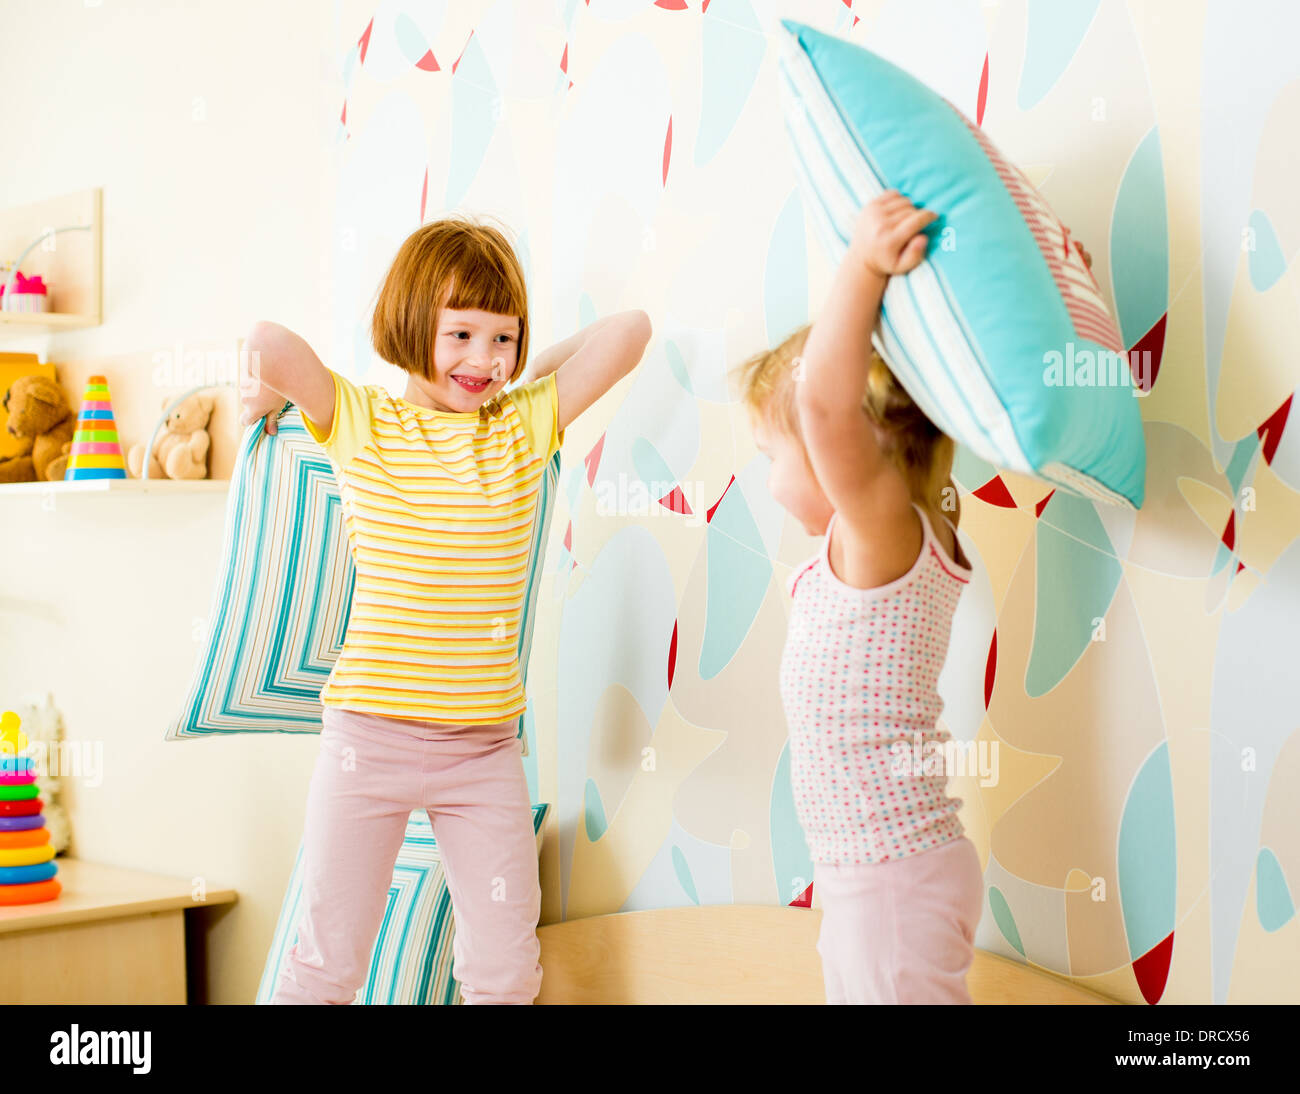 kids sisters playing with pillows in the bedroom Stock Photo